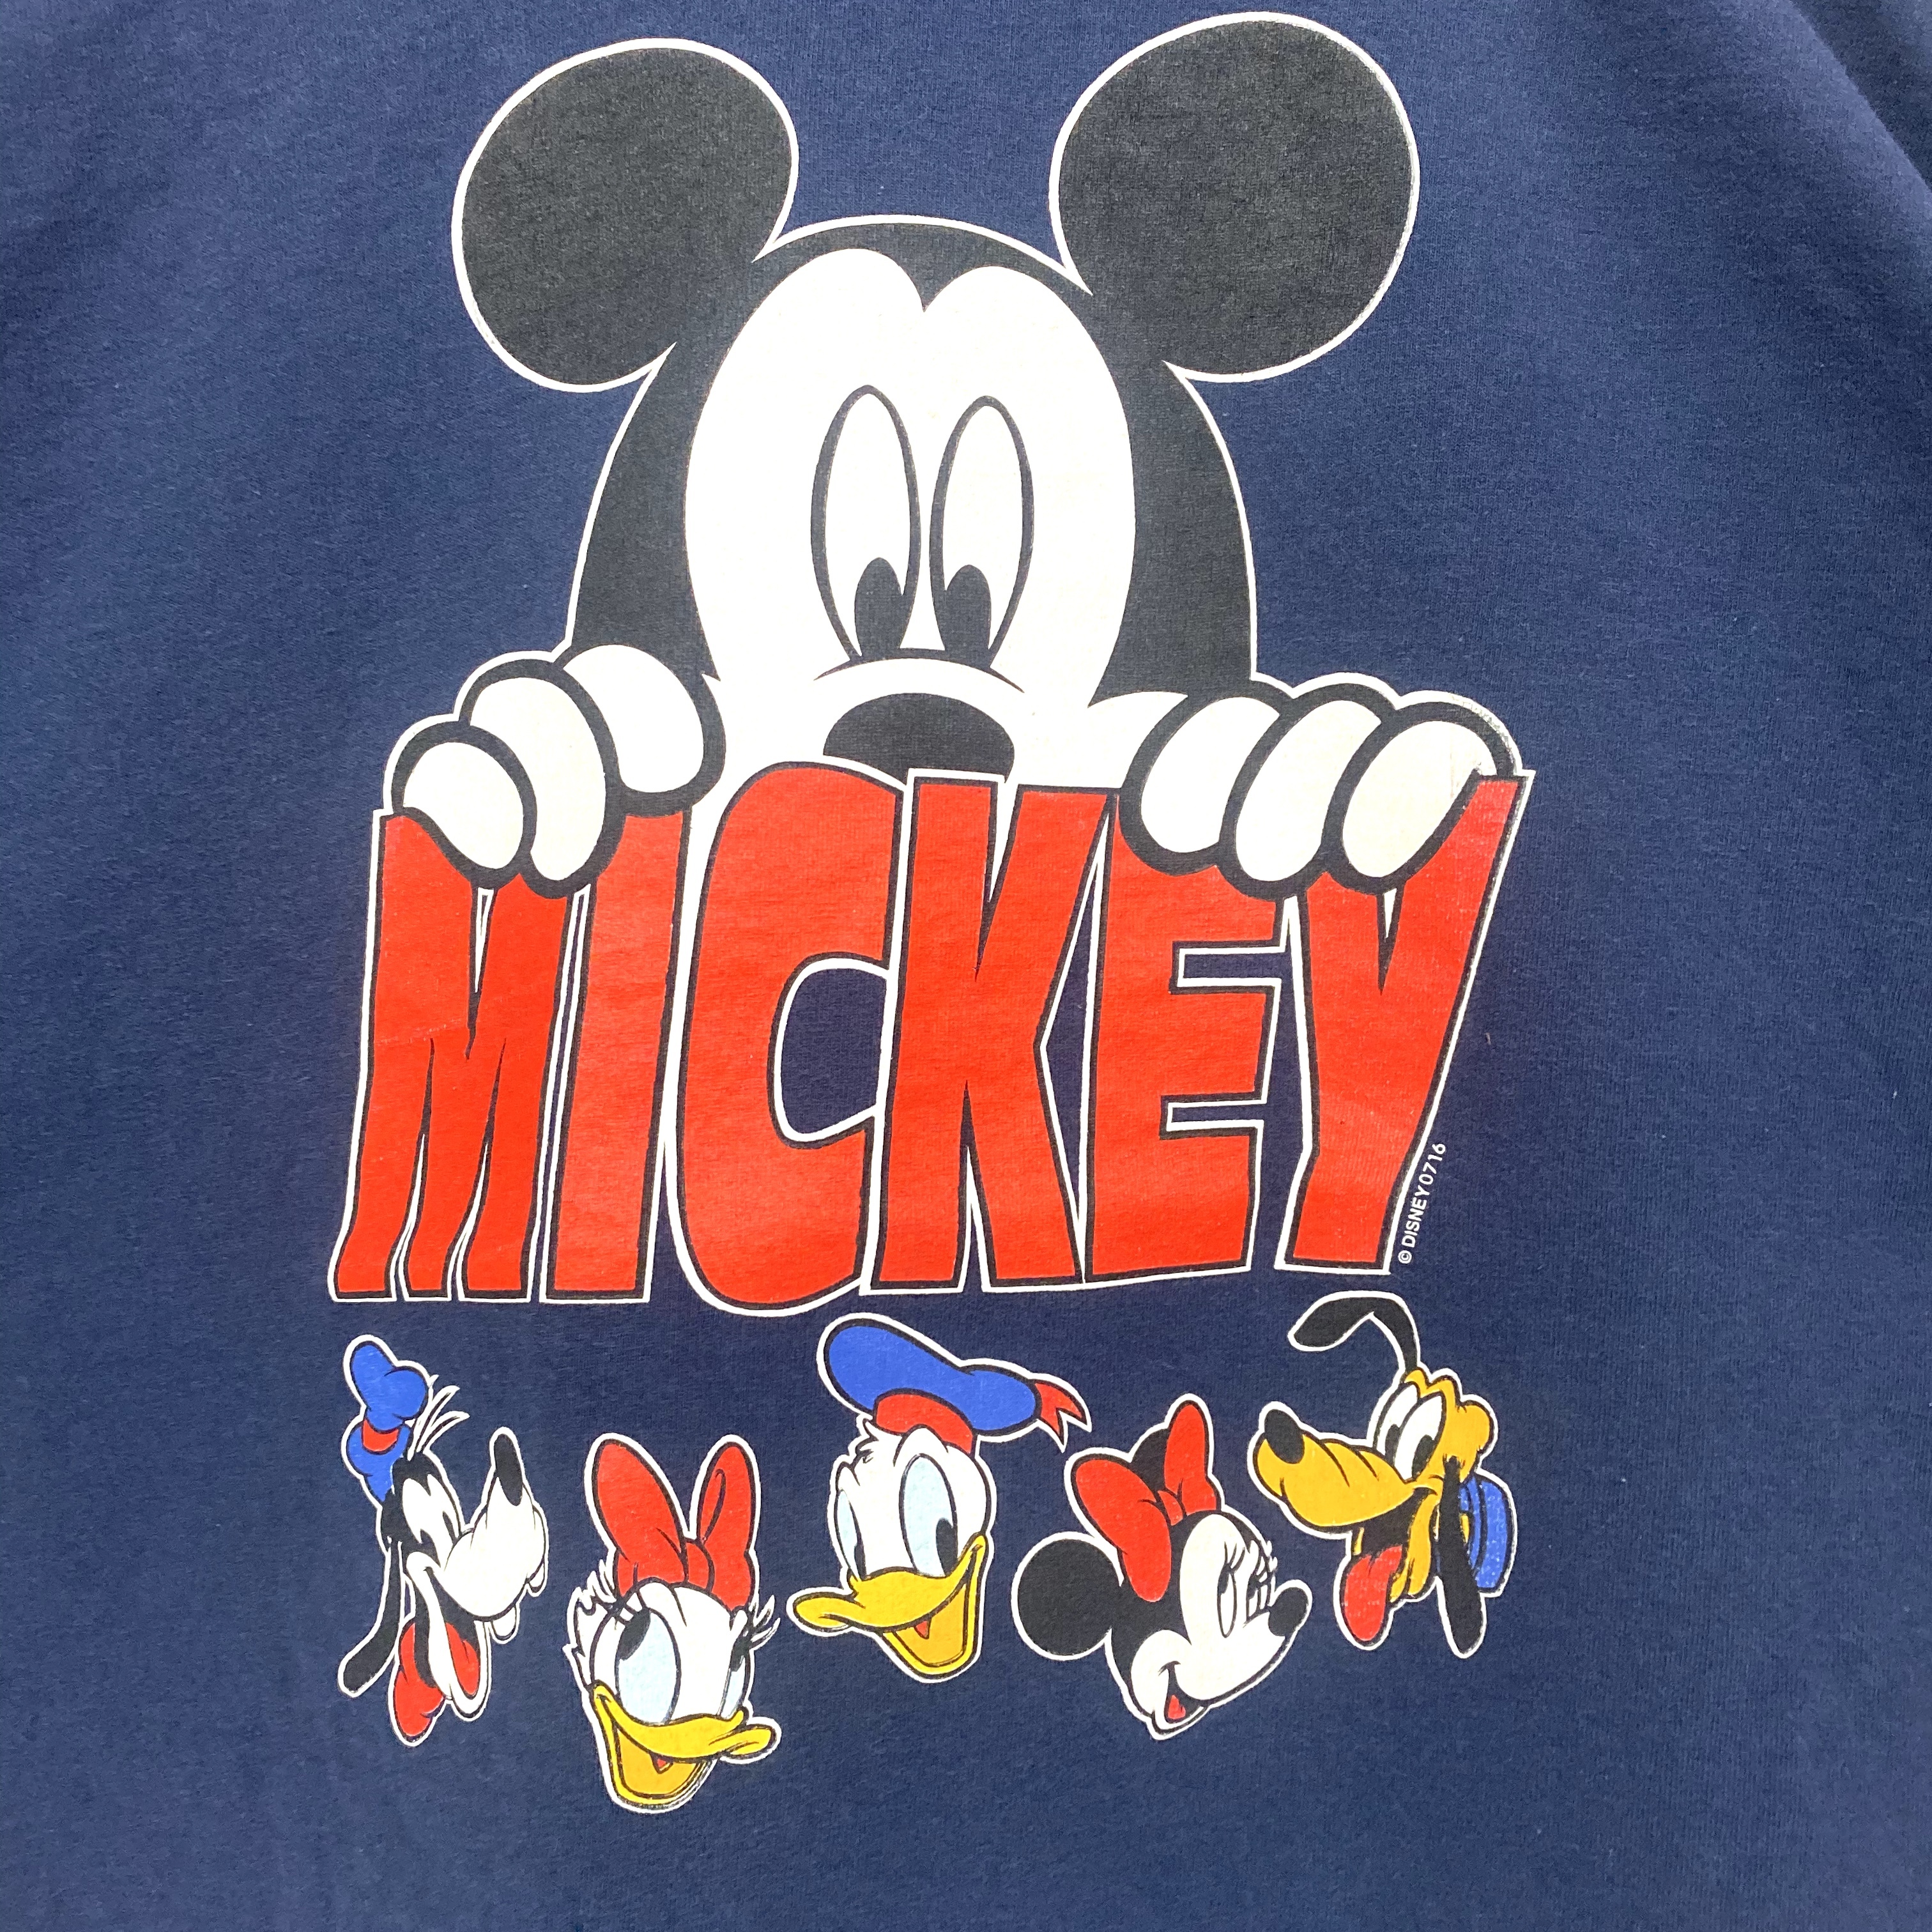 Disney ディズニー Mickey Unlimited Mickey Mouse ミッキーマウス プリントtシャツ キャラクターtシャツ メンズl レディース 古着 Tシャツ All15 Cave 古着屋 公式 古着通販サイト